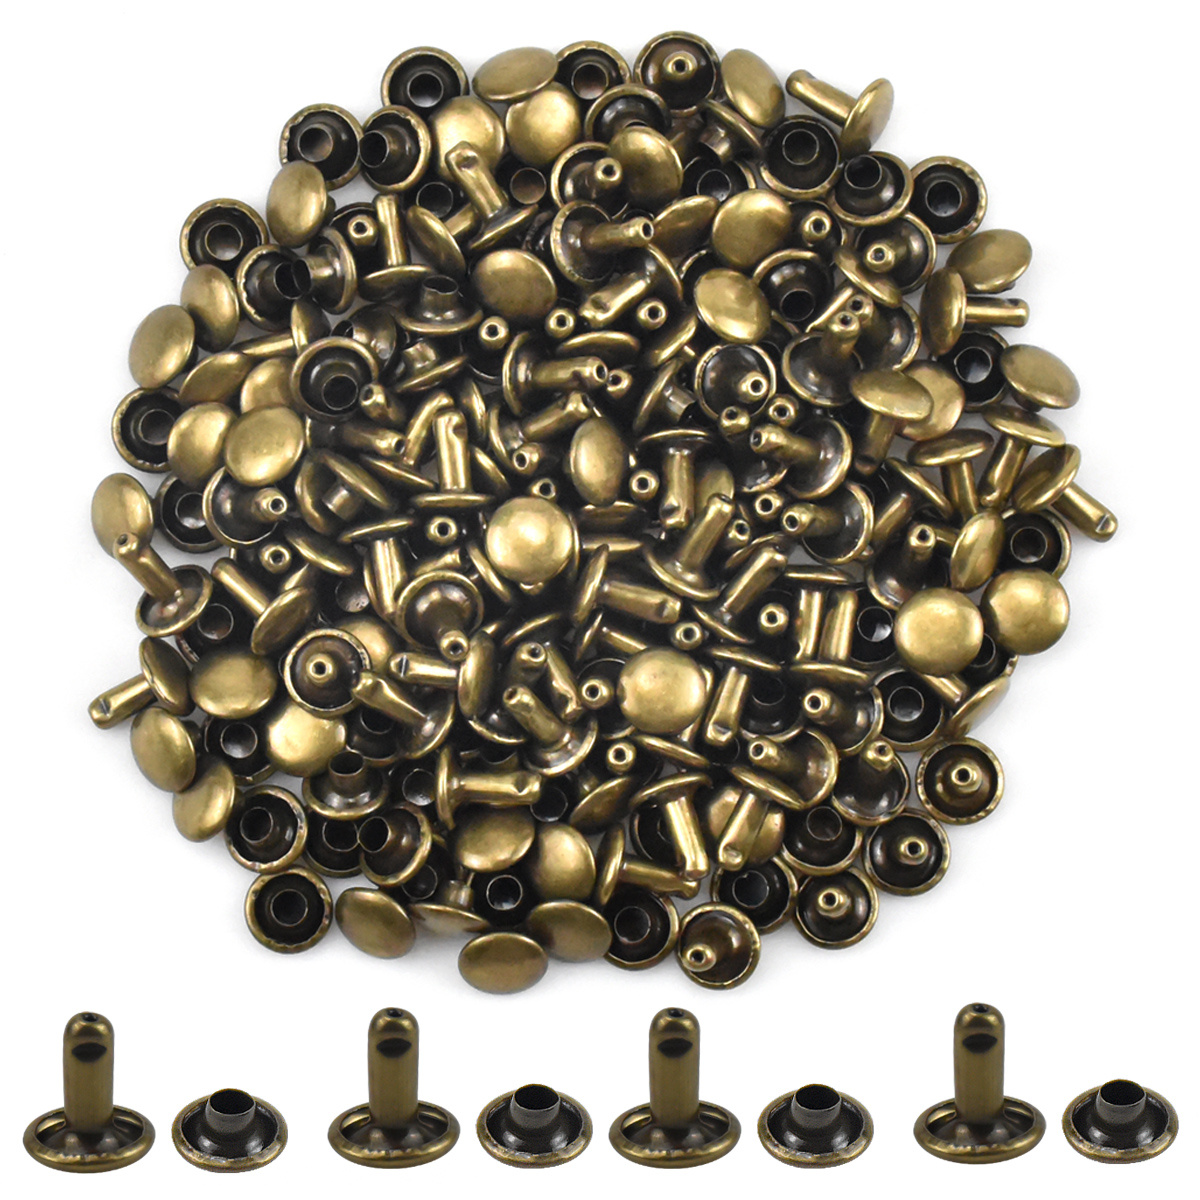 Brass Double Cap Tubular Rivets With 3 Part Hand Tool Set for